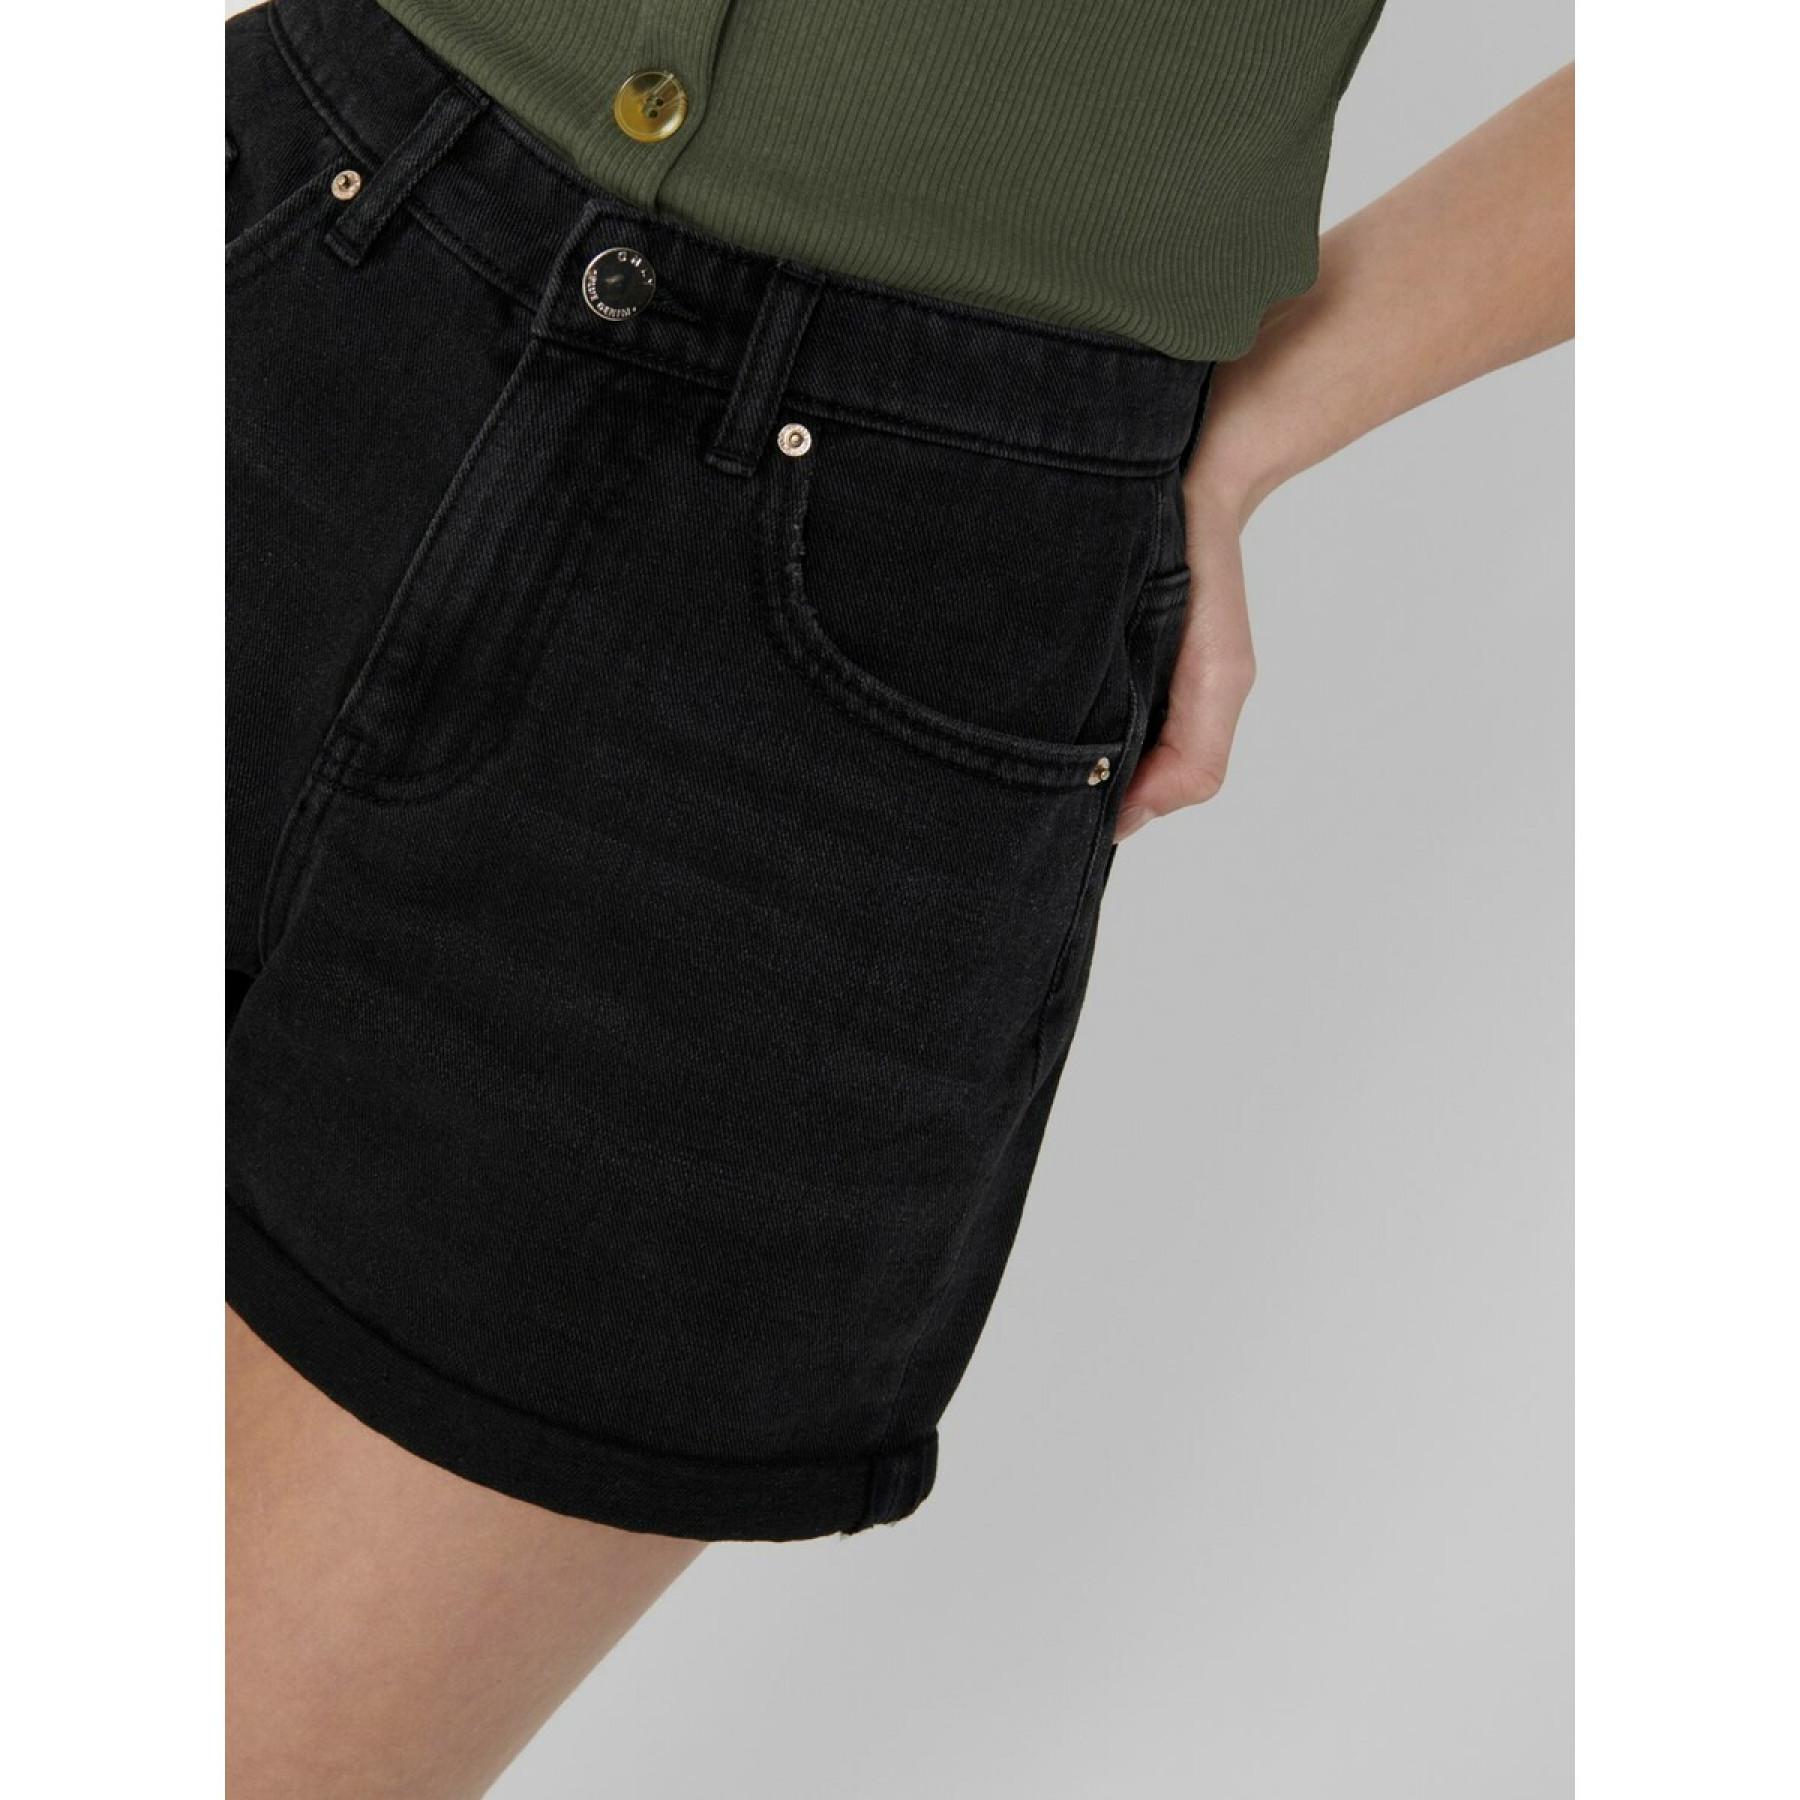 Women's shorts Only Phine life